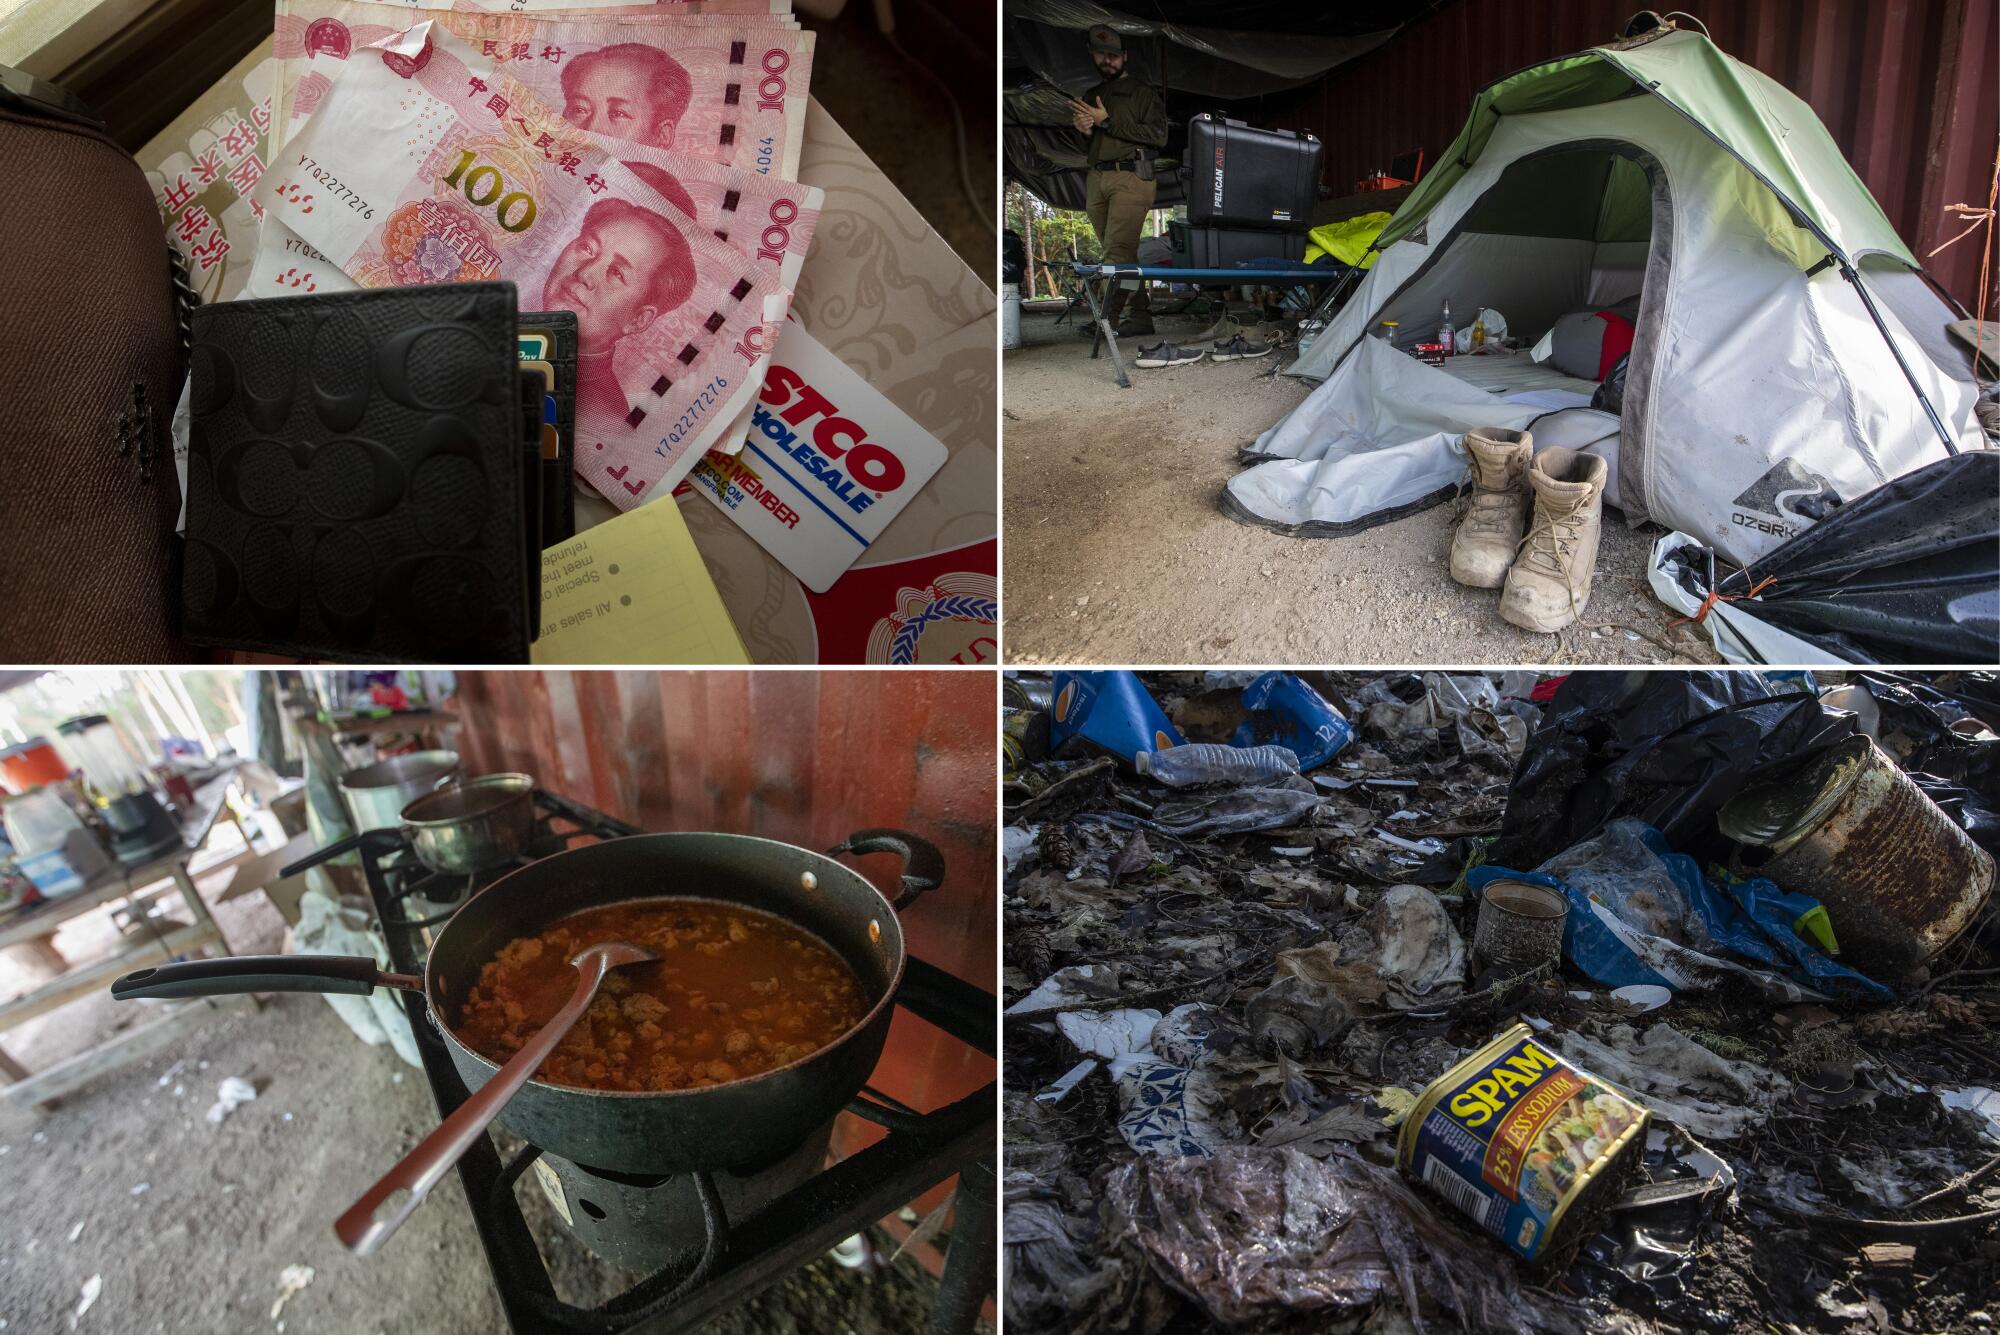 Chinese banknotes, a tent occupied by a grower, a discarded can of Spam, and a pot of chili left on a stove